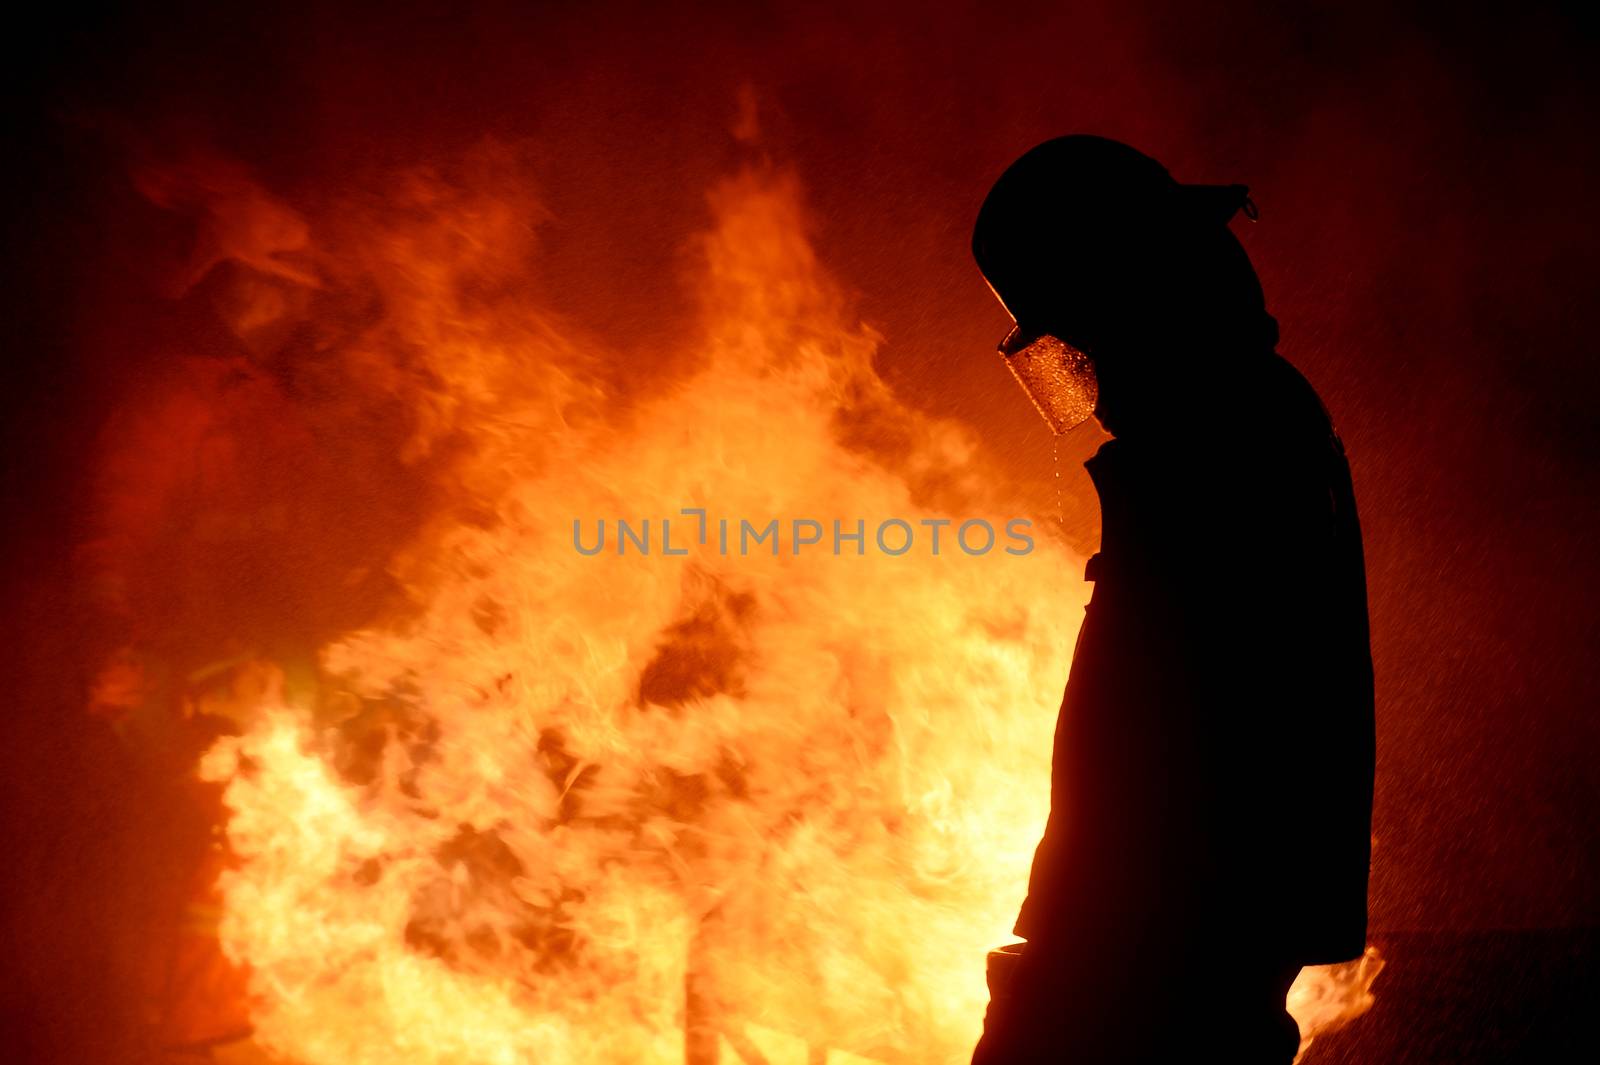 firefighters with fire hose fight with fire at night by sandyman